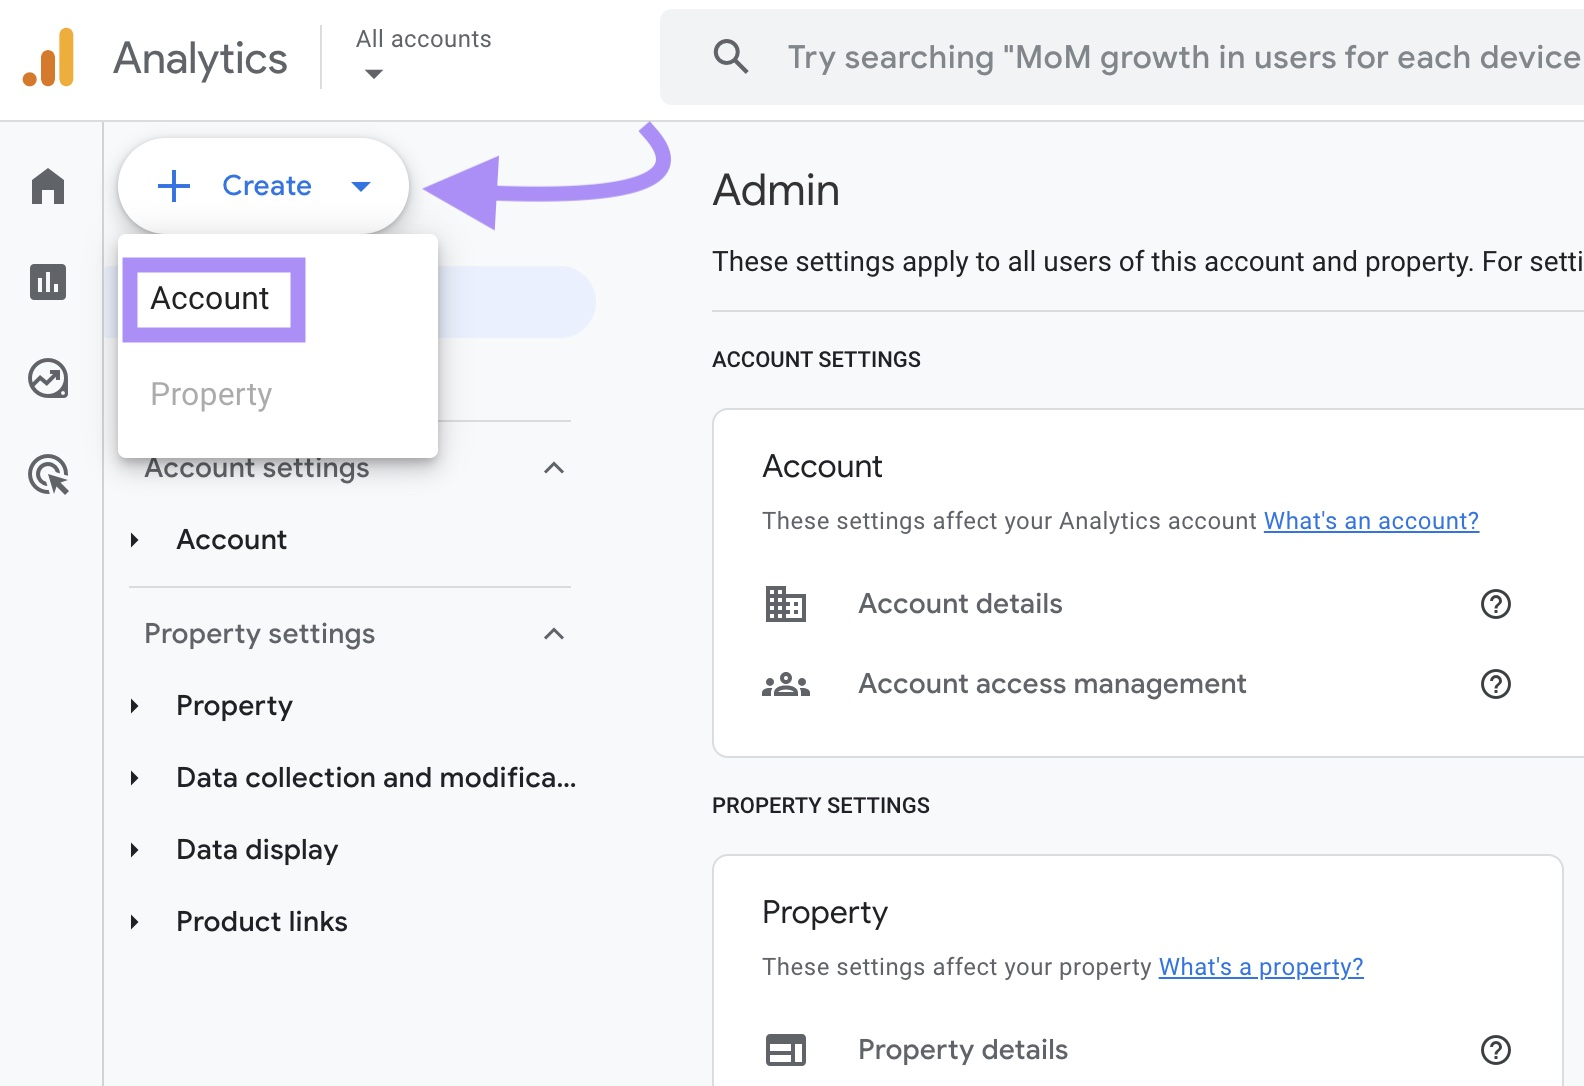 'Create' button clicked and 'Account' selected on Google Analytics.